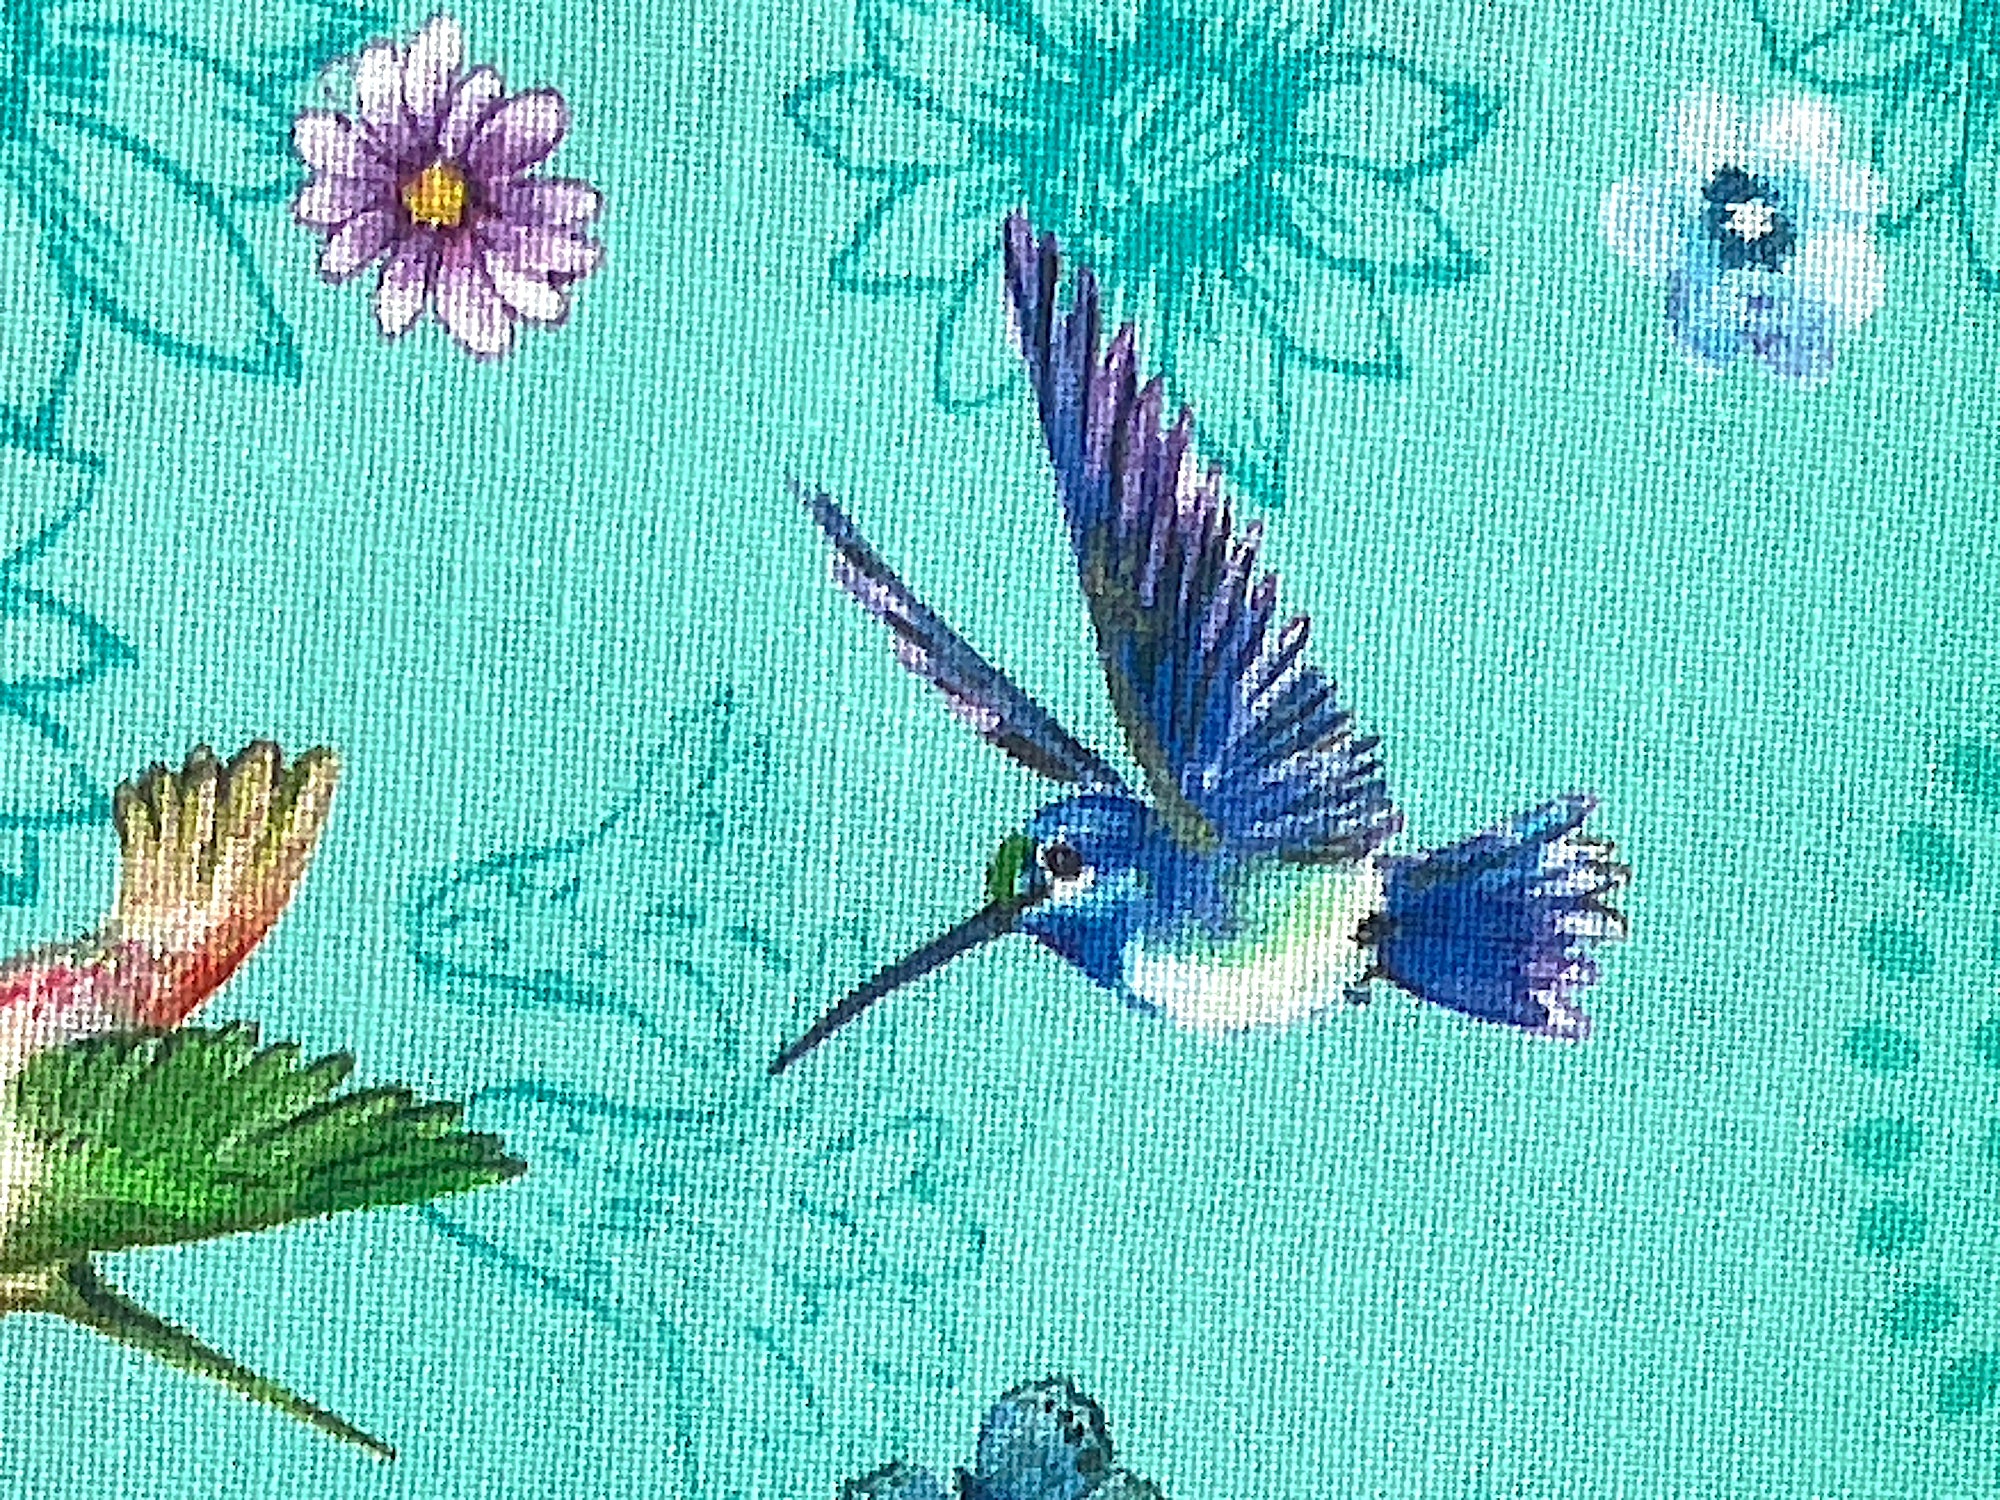 Close up of a blue and white hummingbird.